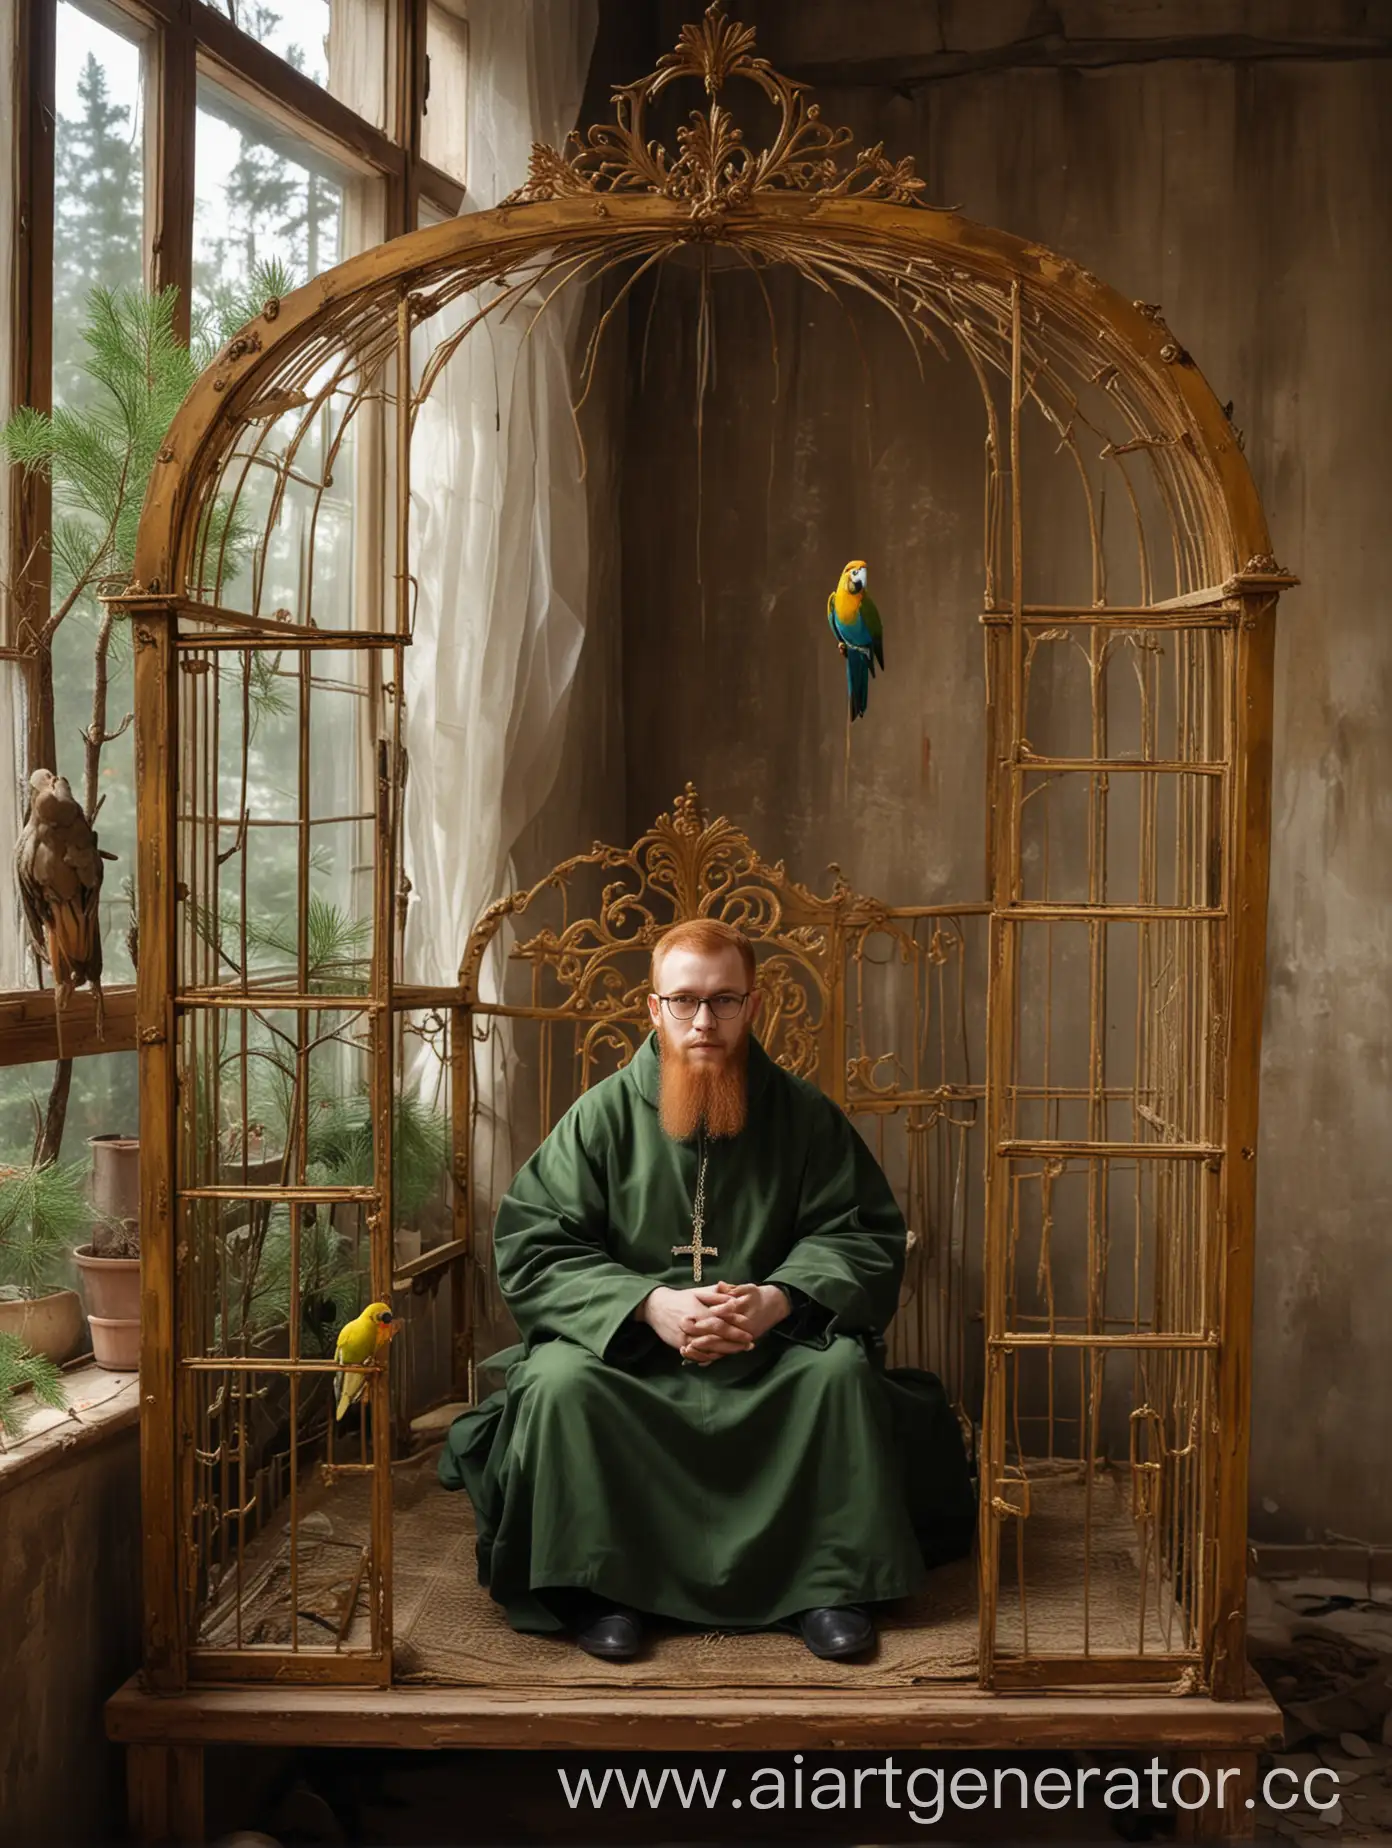 Orthodox-Monk-Bishop-Sitting-on-Throne-in-RussianStyle-Cell-with-Parrot-Ara